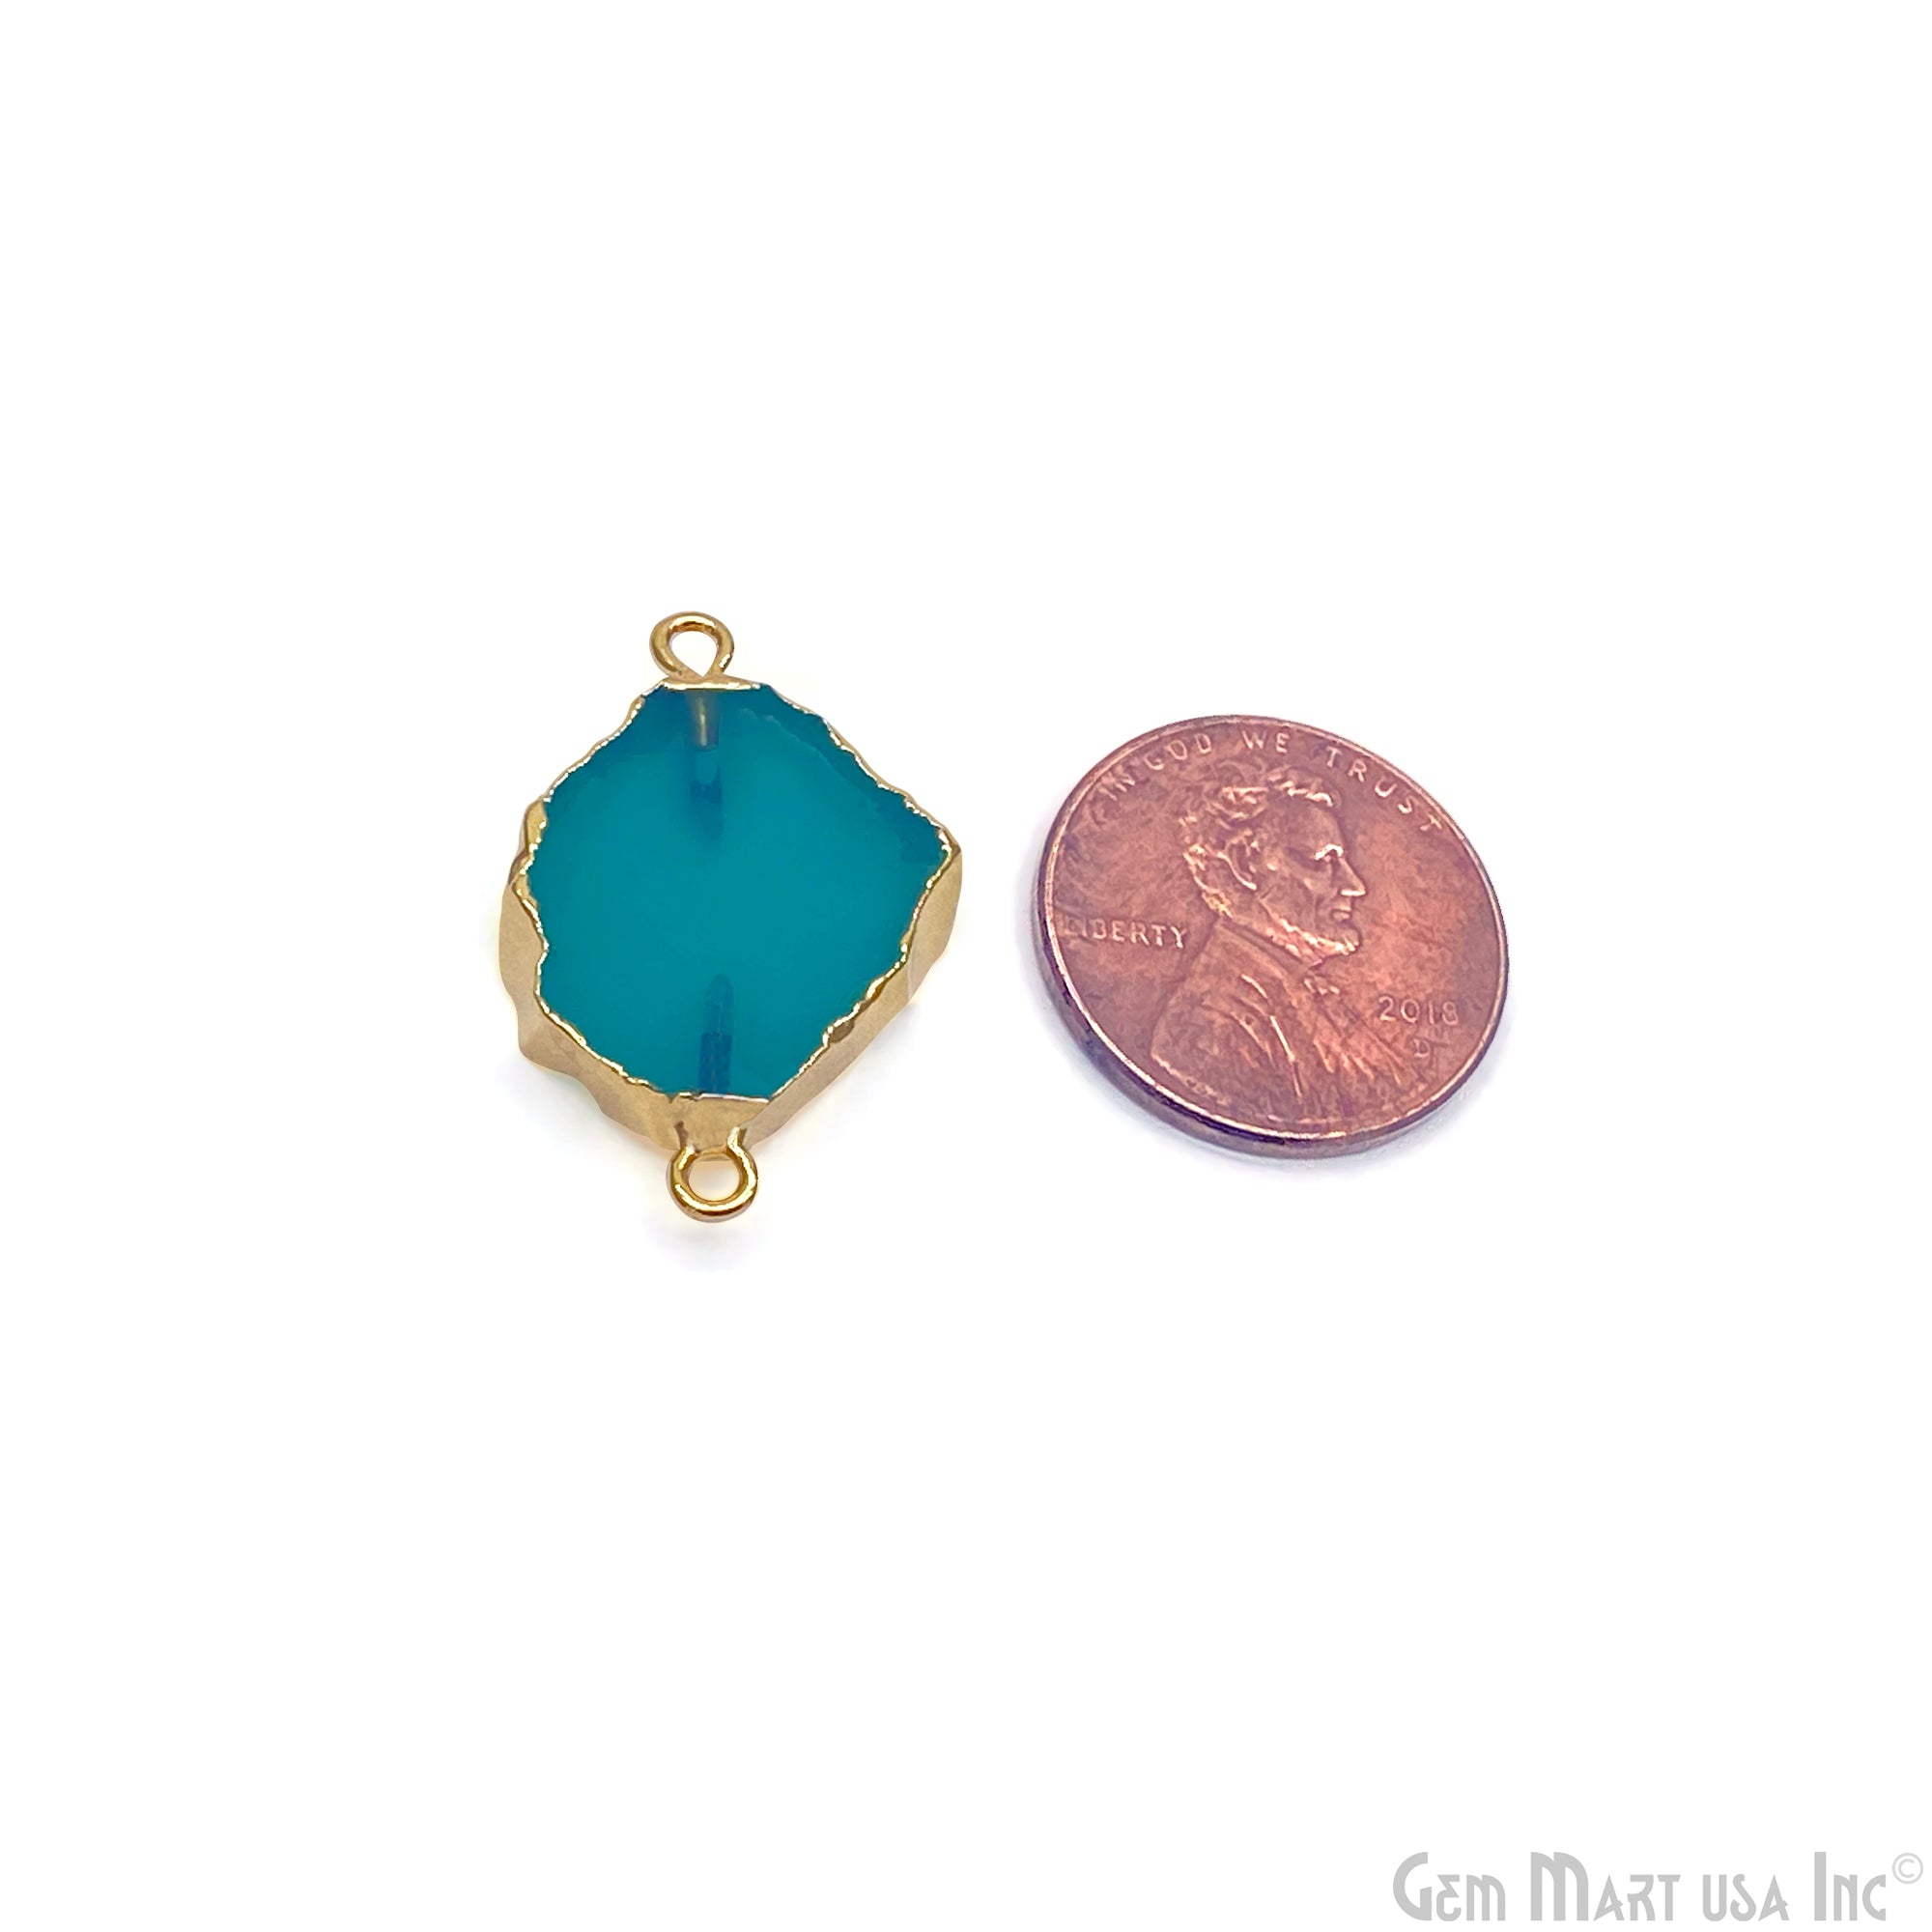 Aqua Chalcedony Petite Flat 21x19mm Gold Electroplated Double Bail Connector